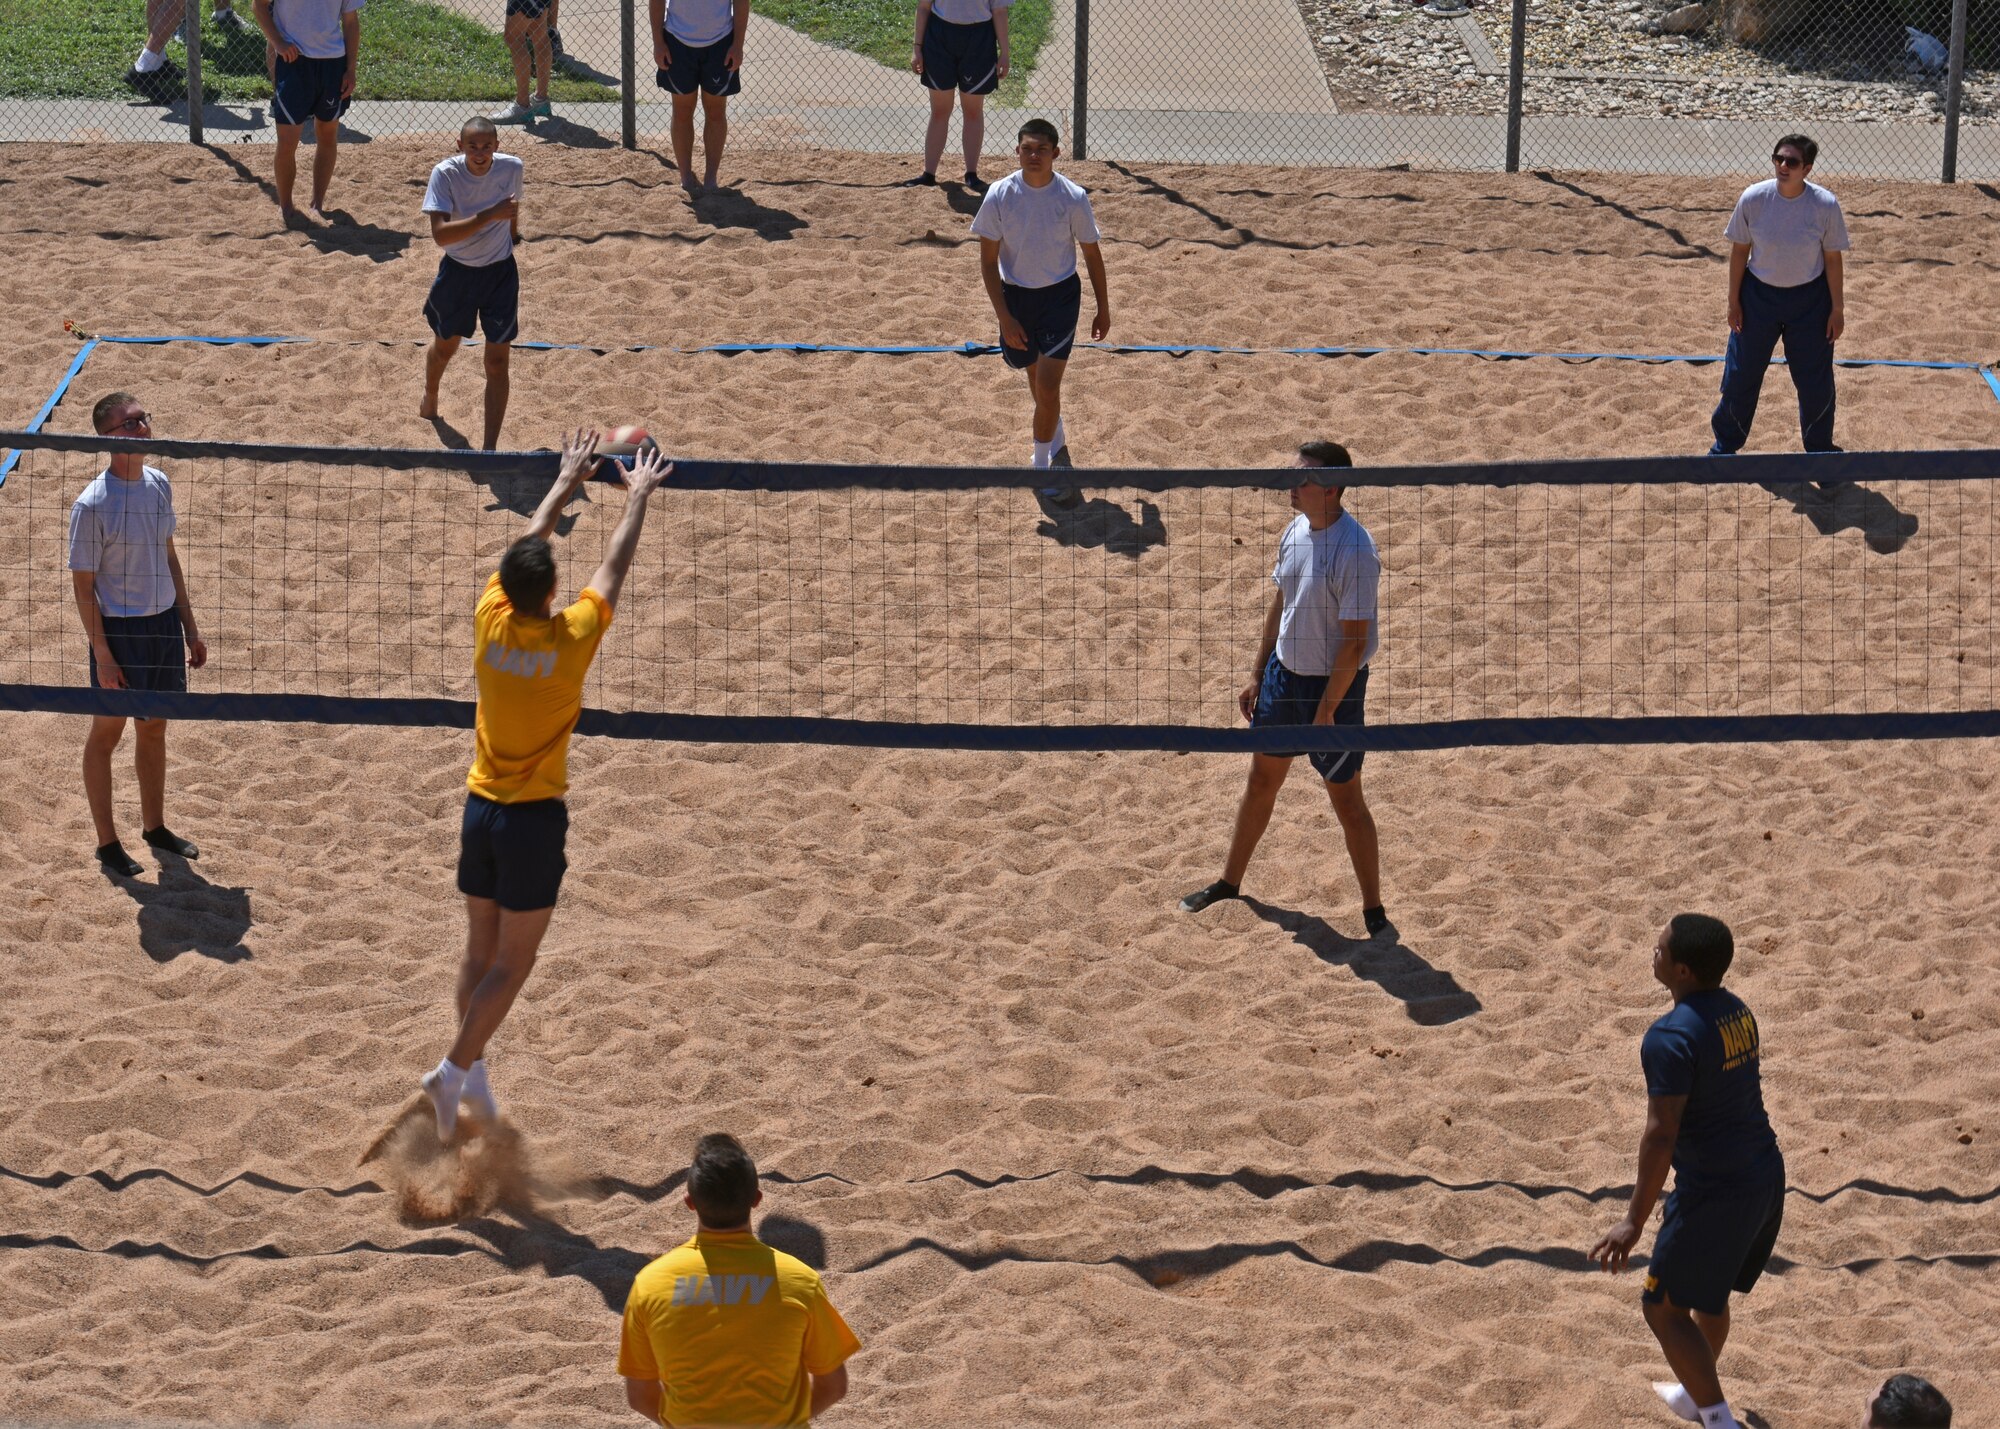 Airmen play volleyball during Wing Sports Day on Goodfellow Air Force Base, Texas, Sept. 17, 2021. Teams competed to earn points for their units in an attempt to win the bracket. (U.S. Air Force photo by Senior Airman Ashley Thrash)